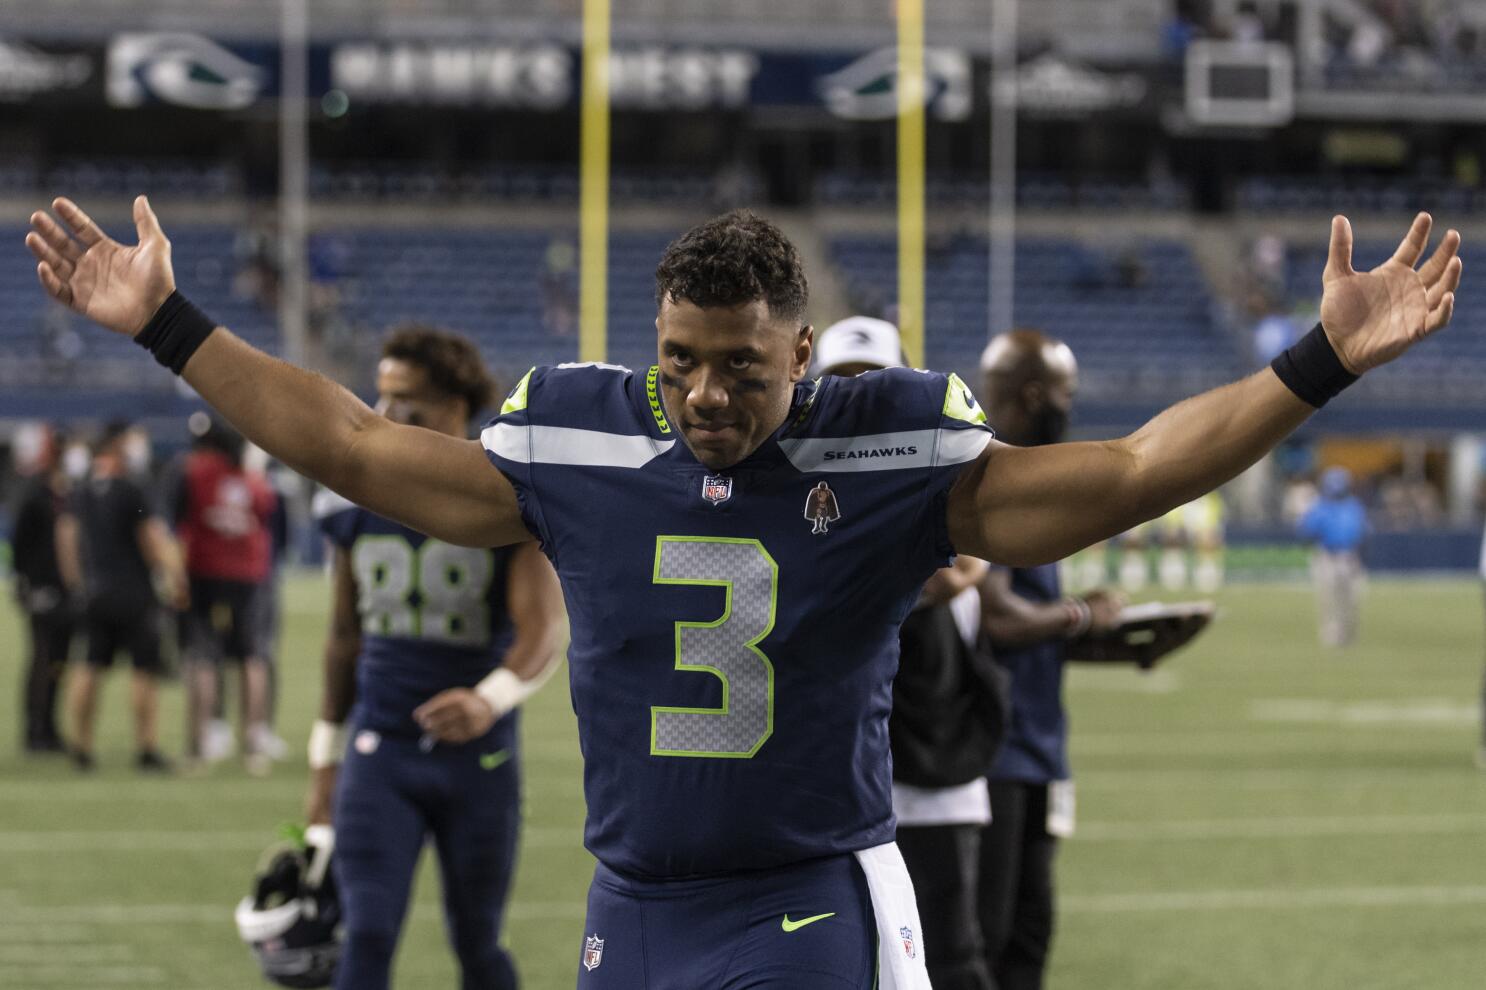 Russell Wilson stands tall for Seahawks in Super Bowl